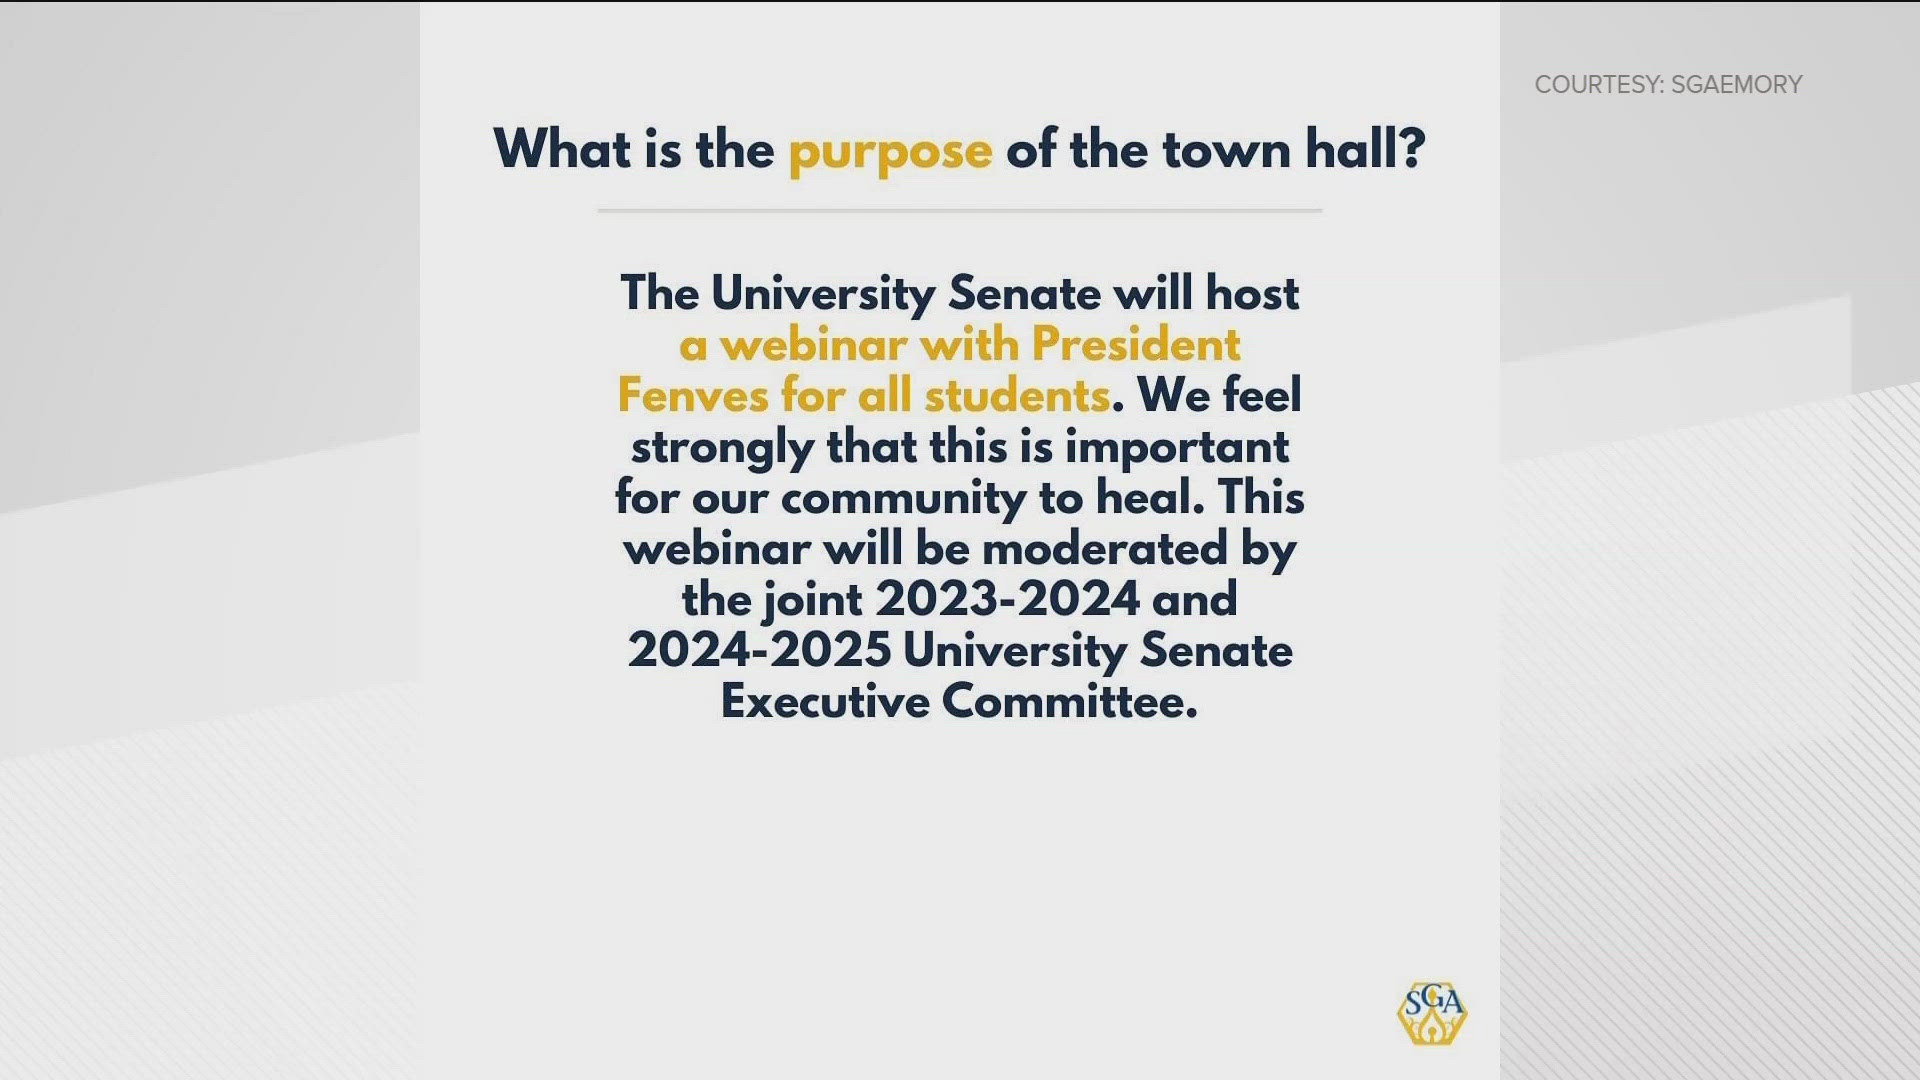 There was one over the weekend at Georgia State University and students at Emory will have a town hall with the school president on Monday.